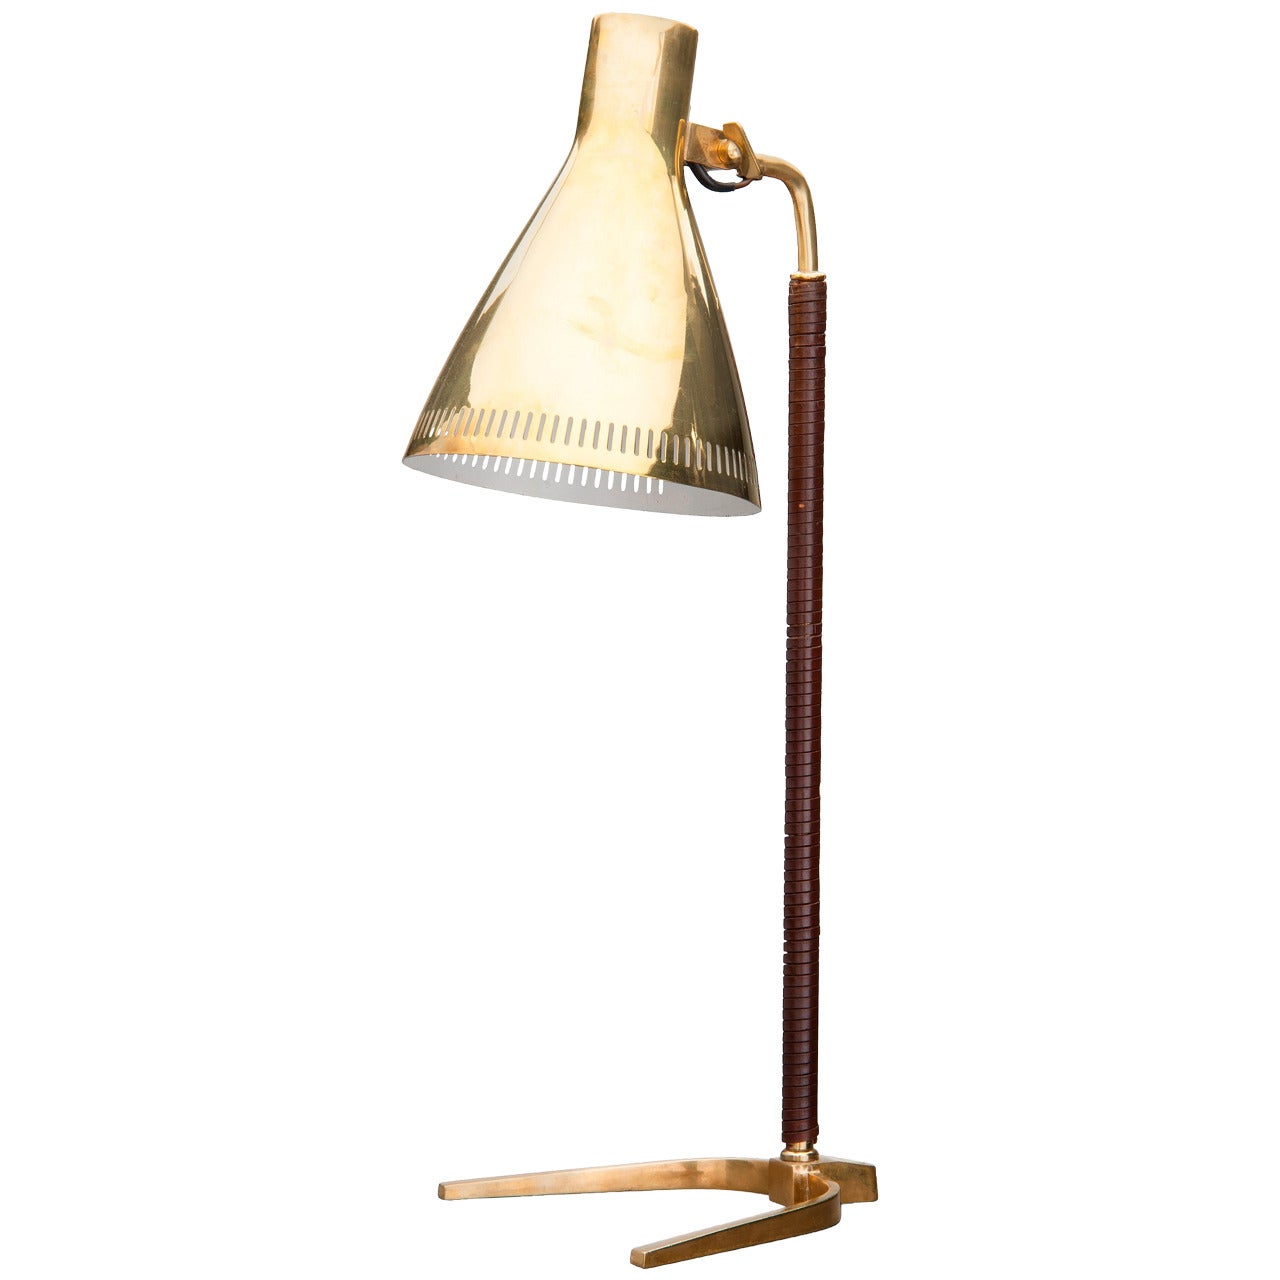 Paavo Tynell Table Lamp, Model "9224"